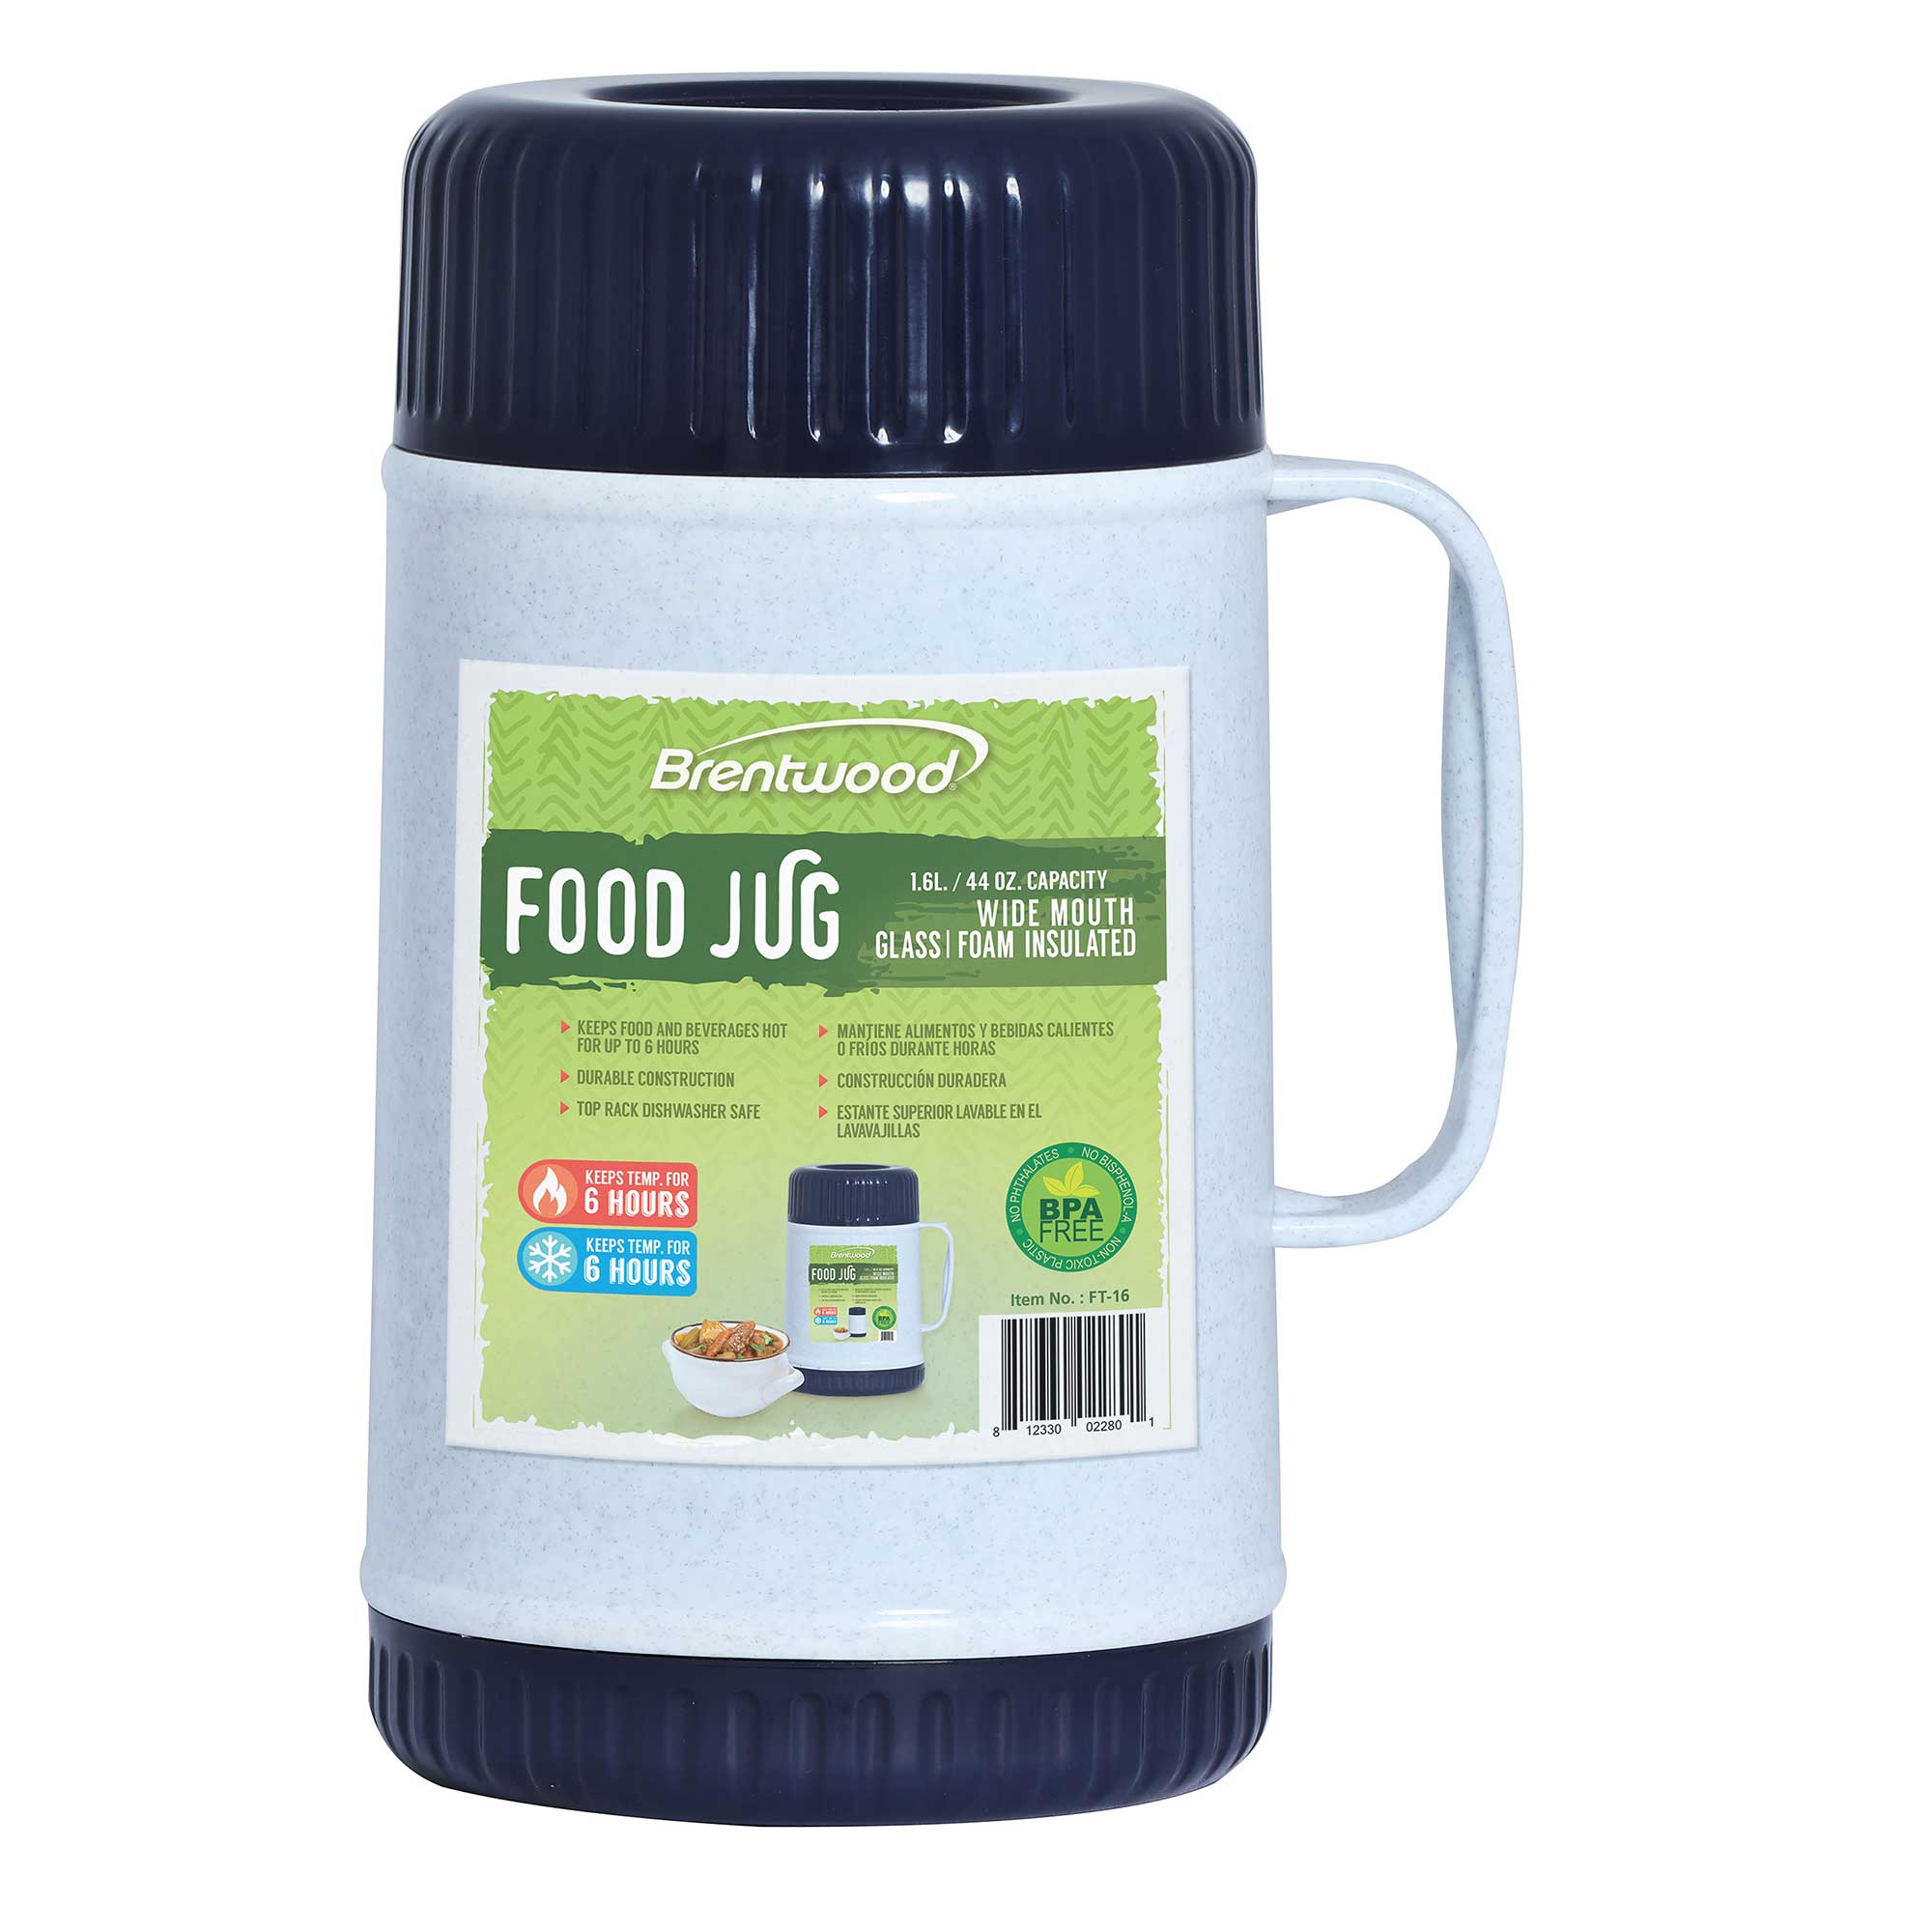 Thermos Glass Wide-mouth Food Jar with Folding Spoon, 16 oz, Blue